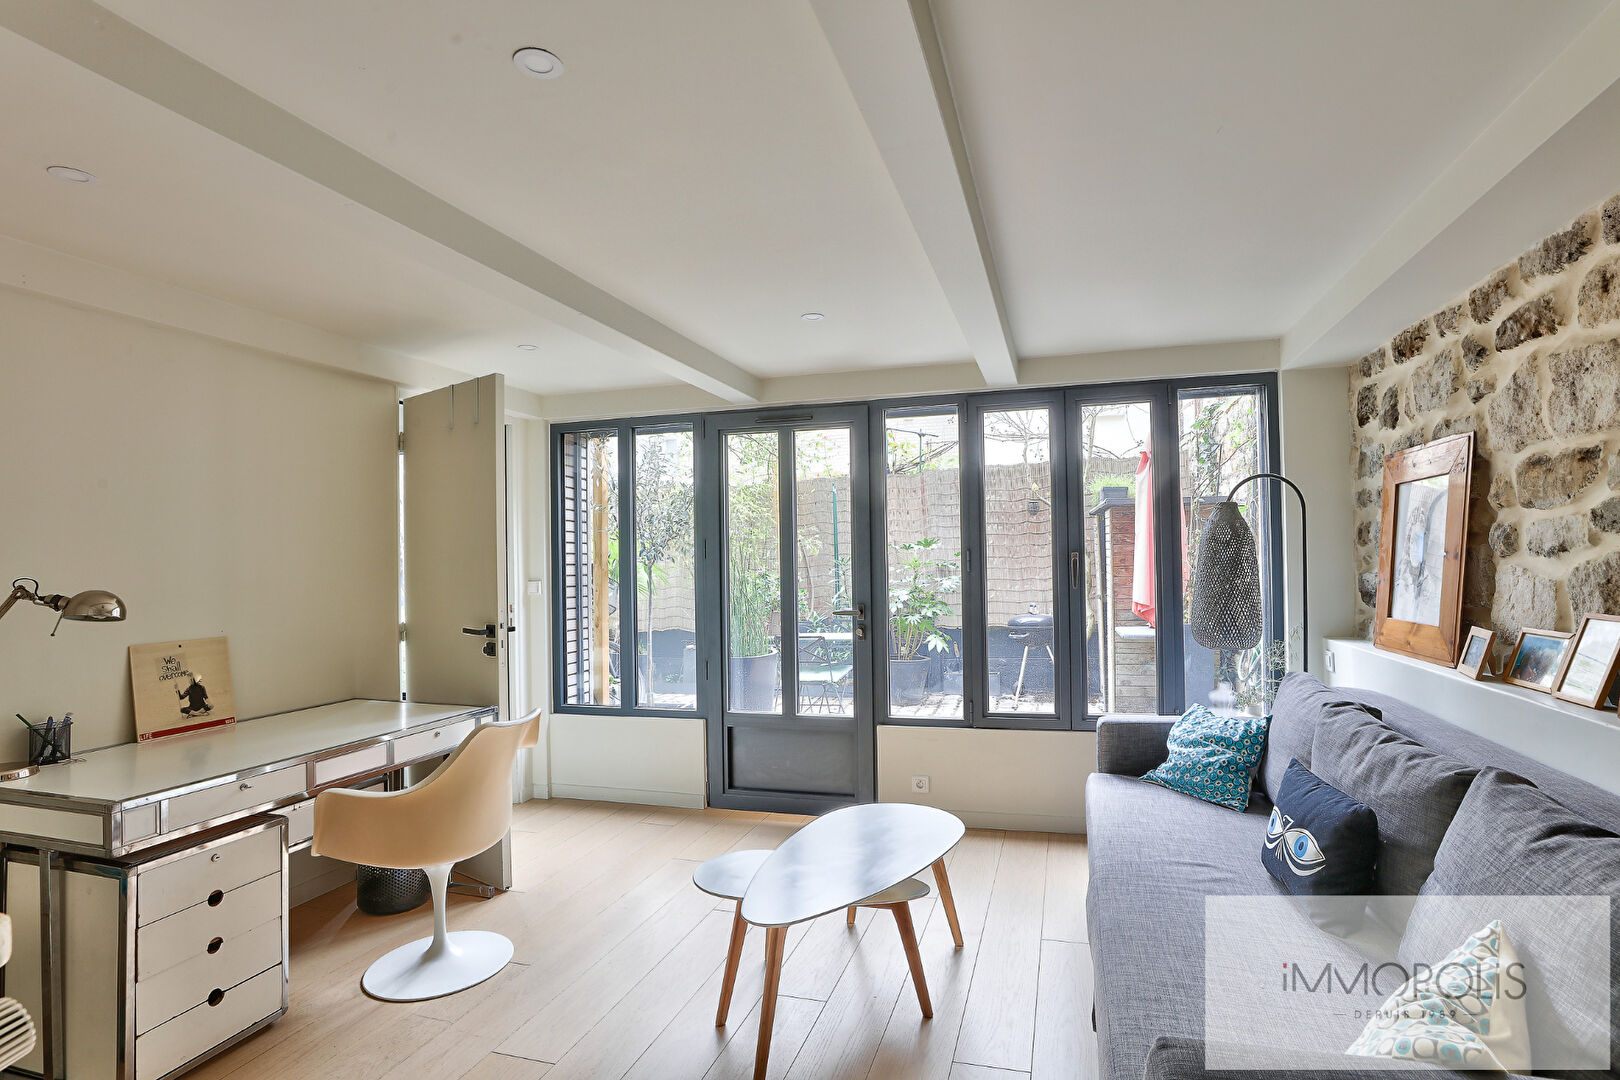 Off-Market: House with exceptional services in Saint Ouen sur Seine, 6 rooms, large reception, 1 interior courtyard and 1 terrace 11